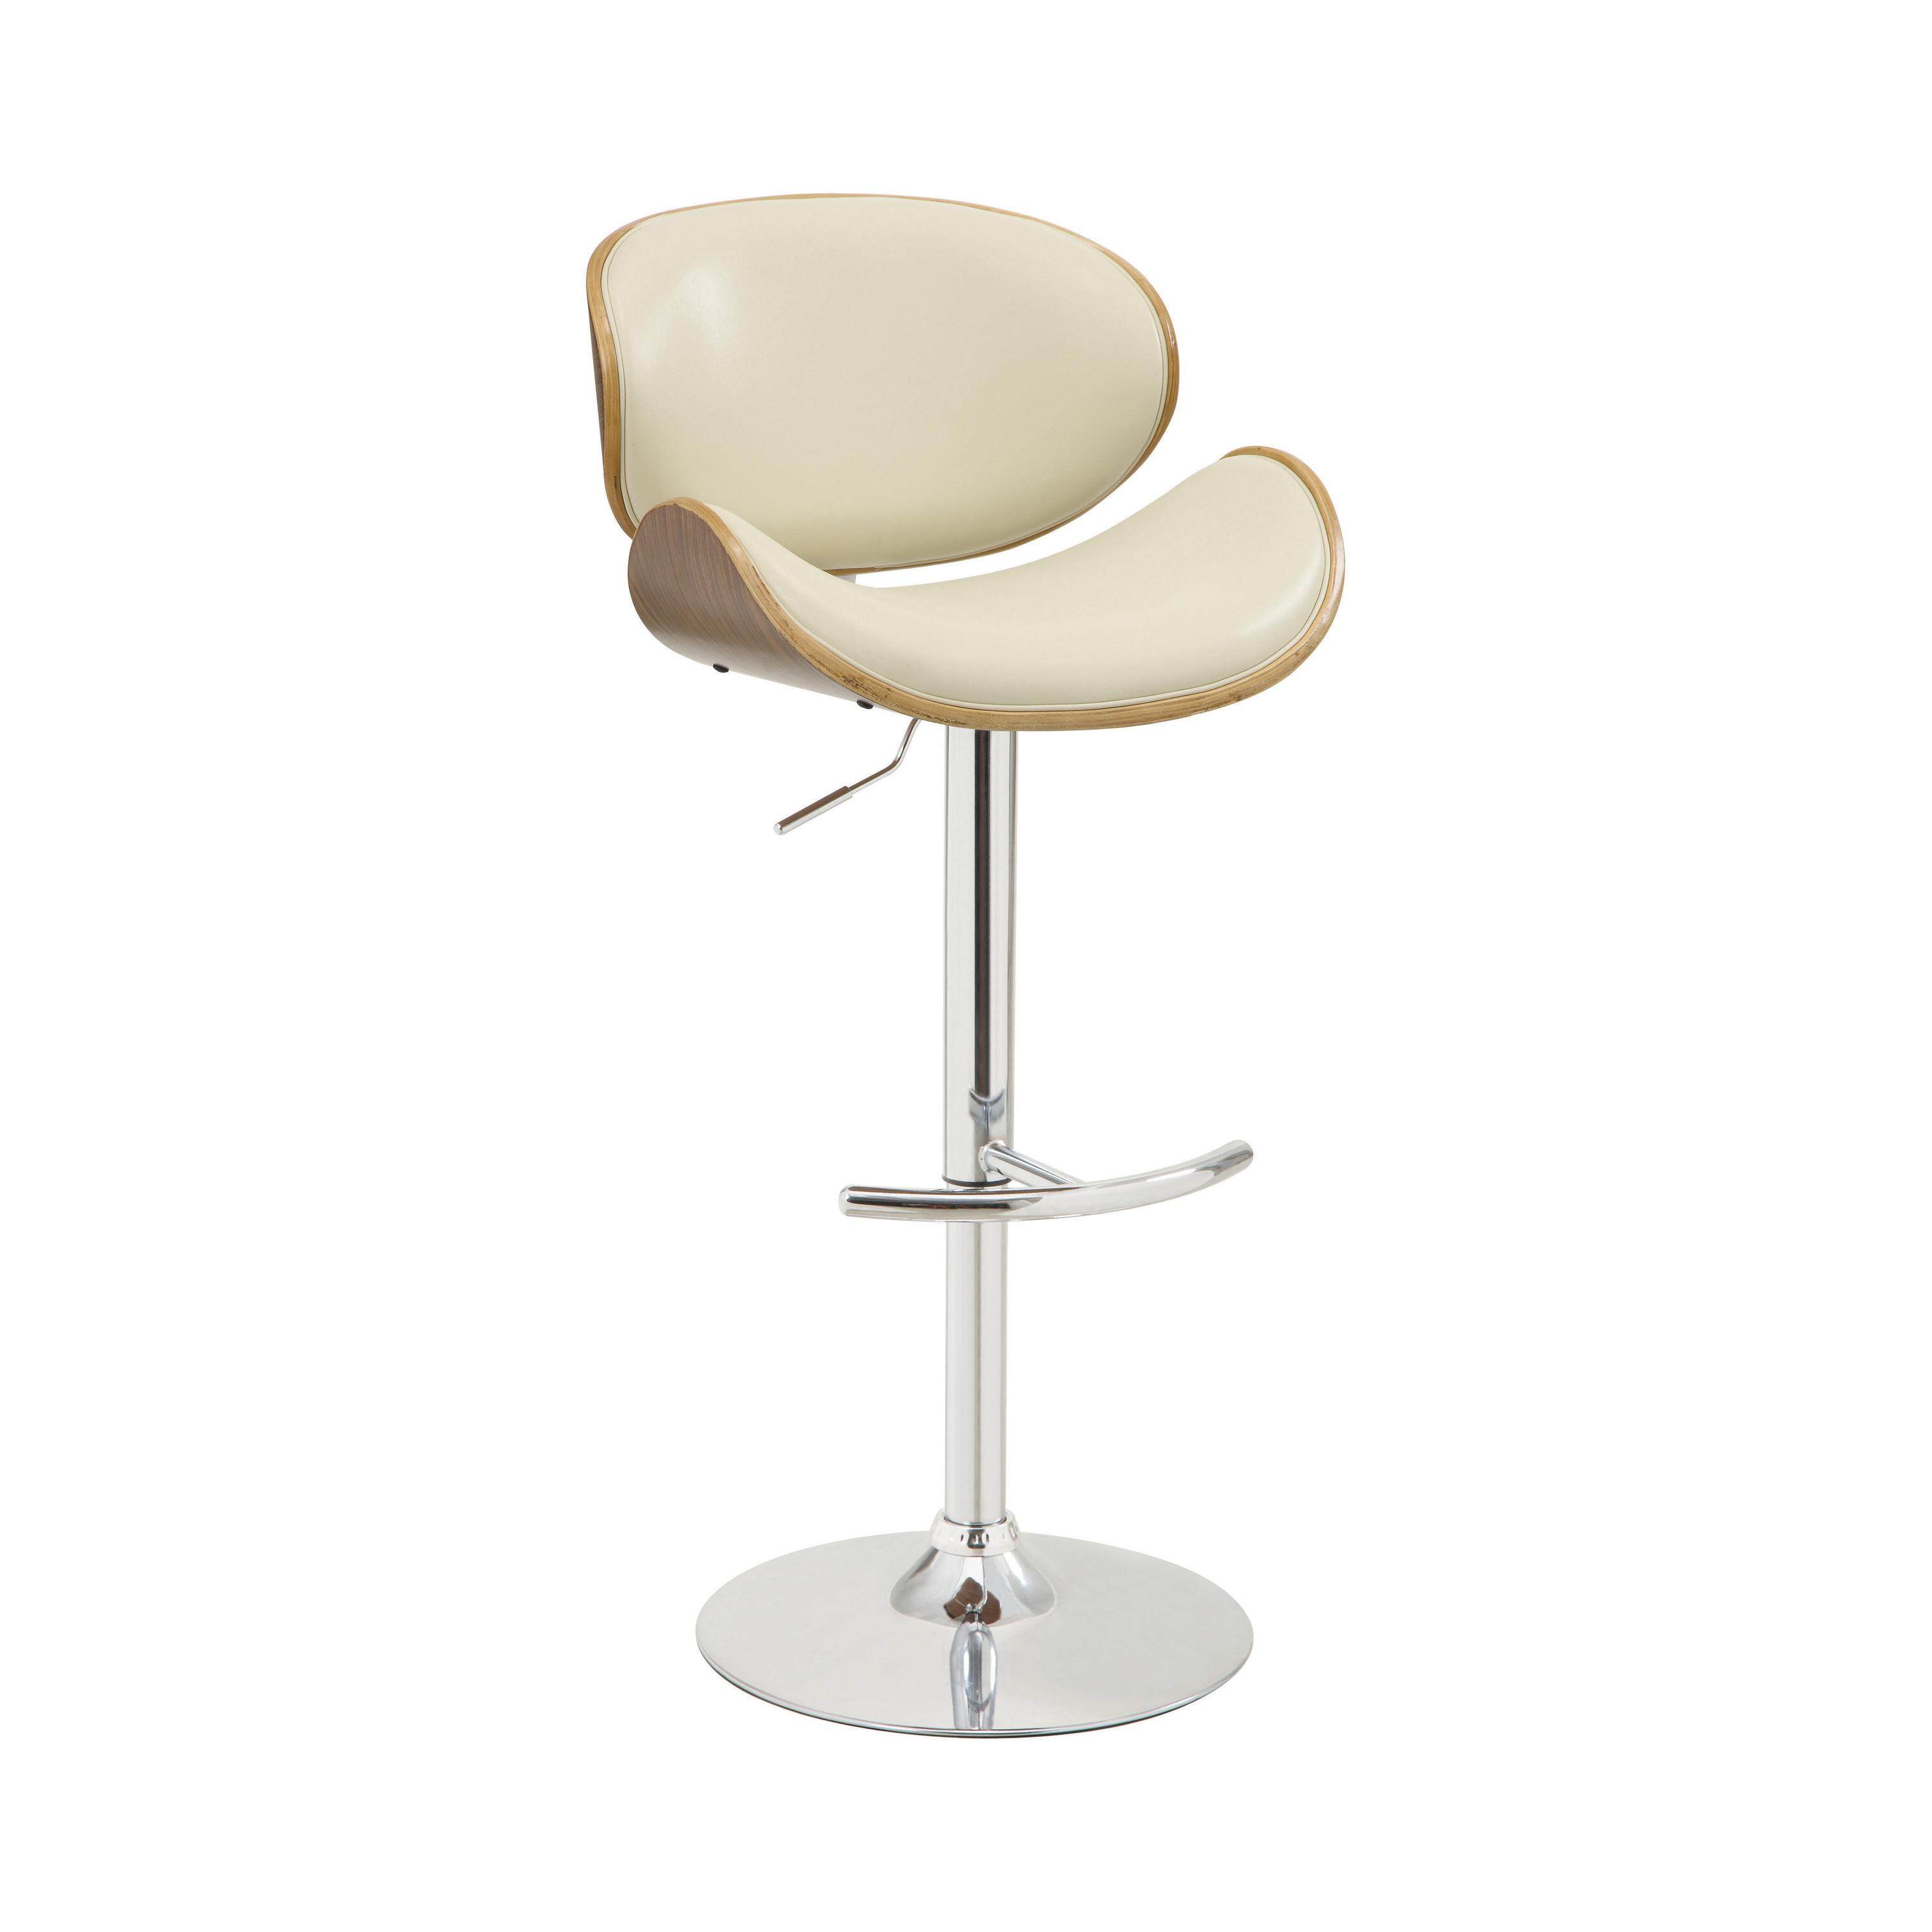 Contemporary Bar Stool 130505 130505 in Cream Leatherette